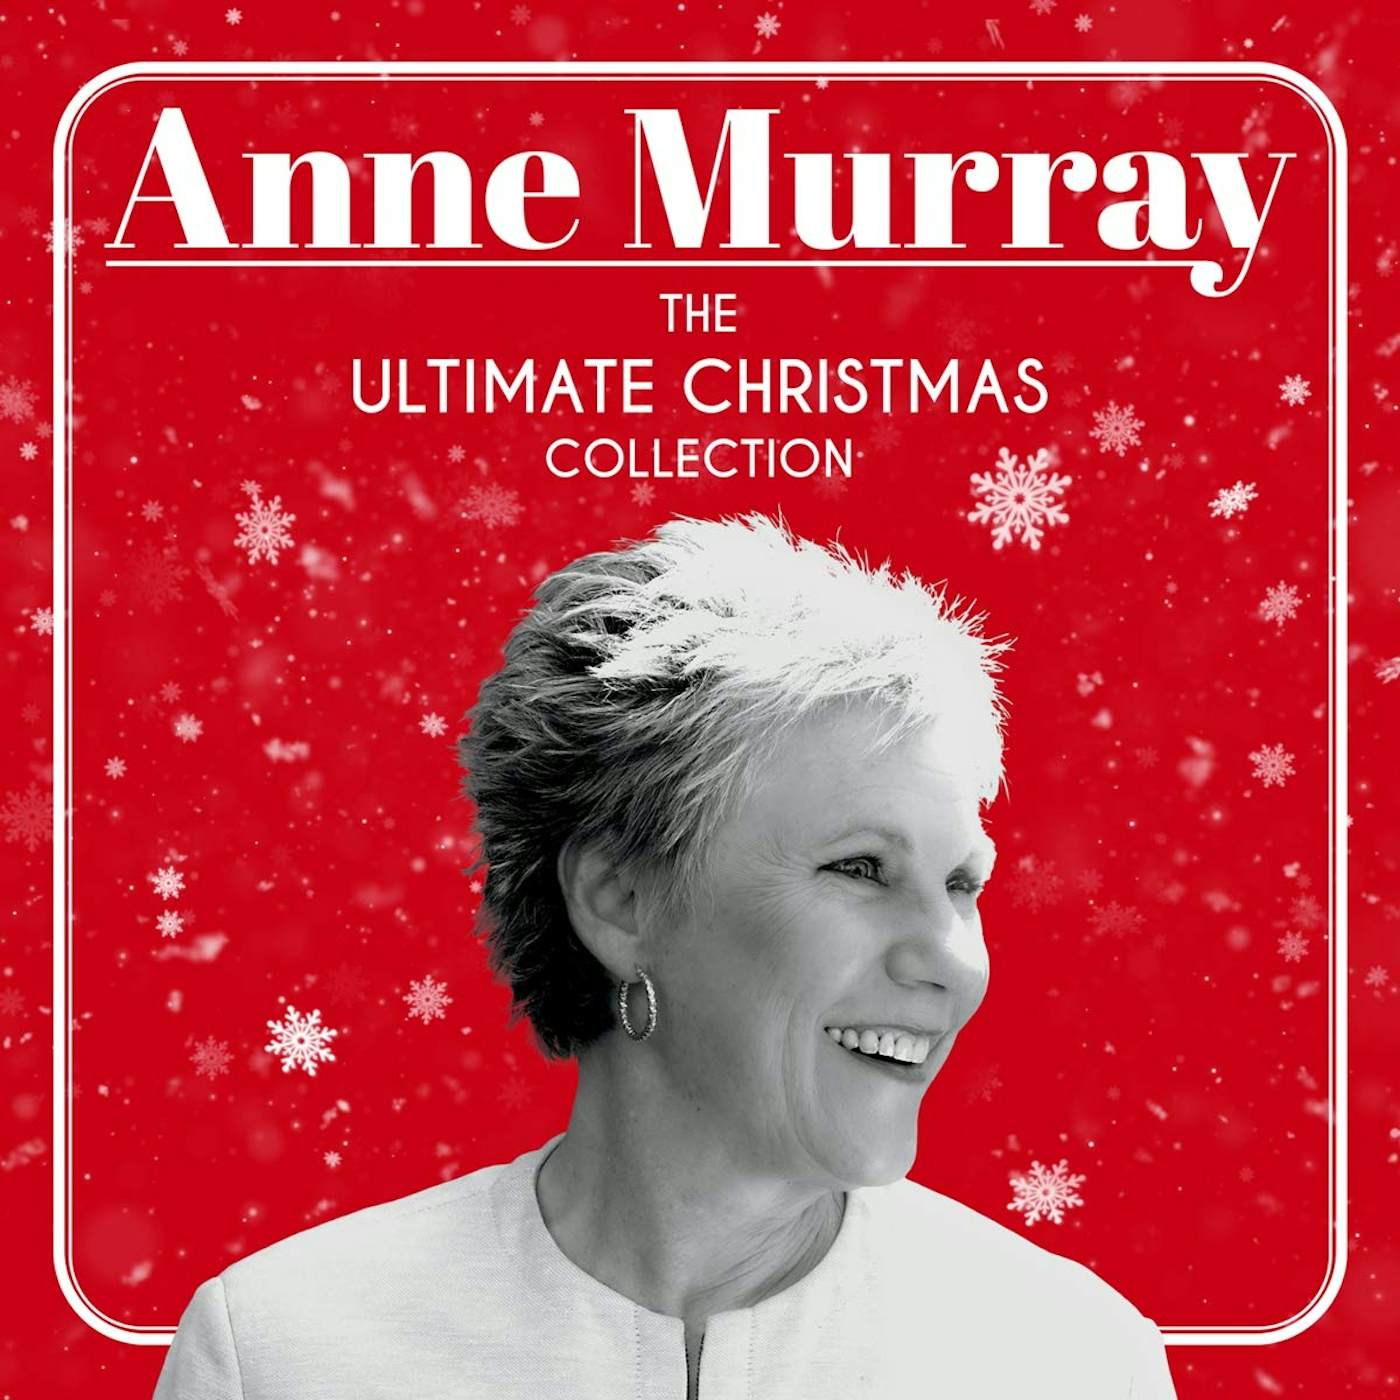 Anne Murray ULTIMATE CHRISTMAS COLLECTION CD